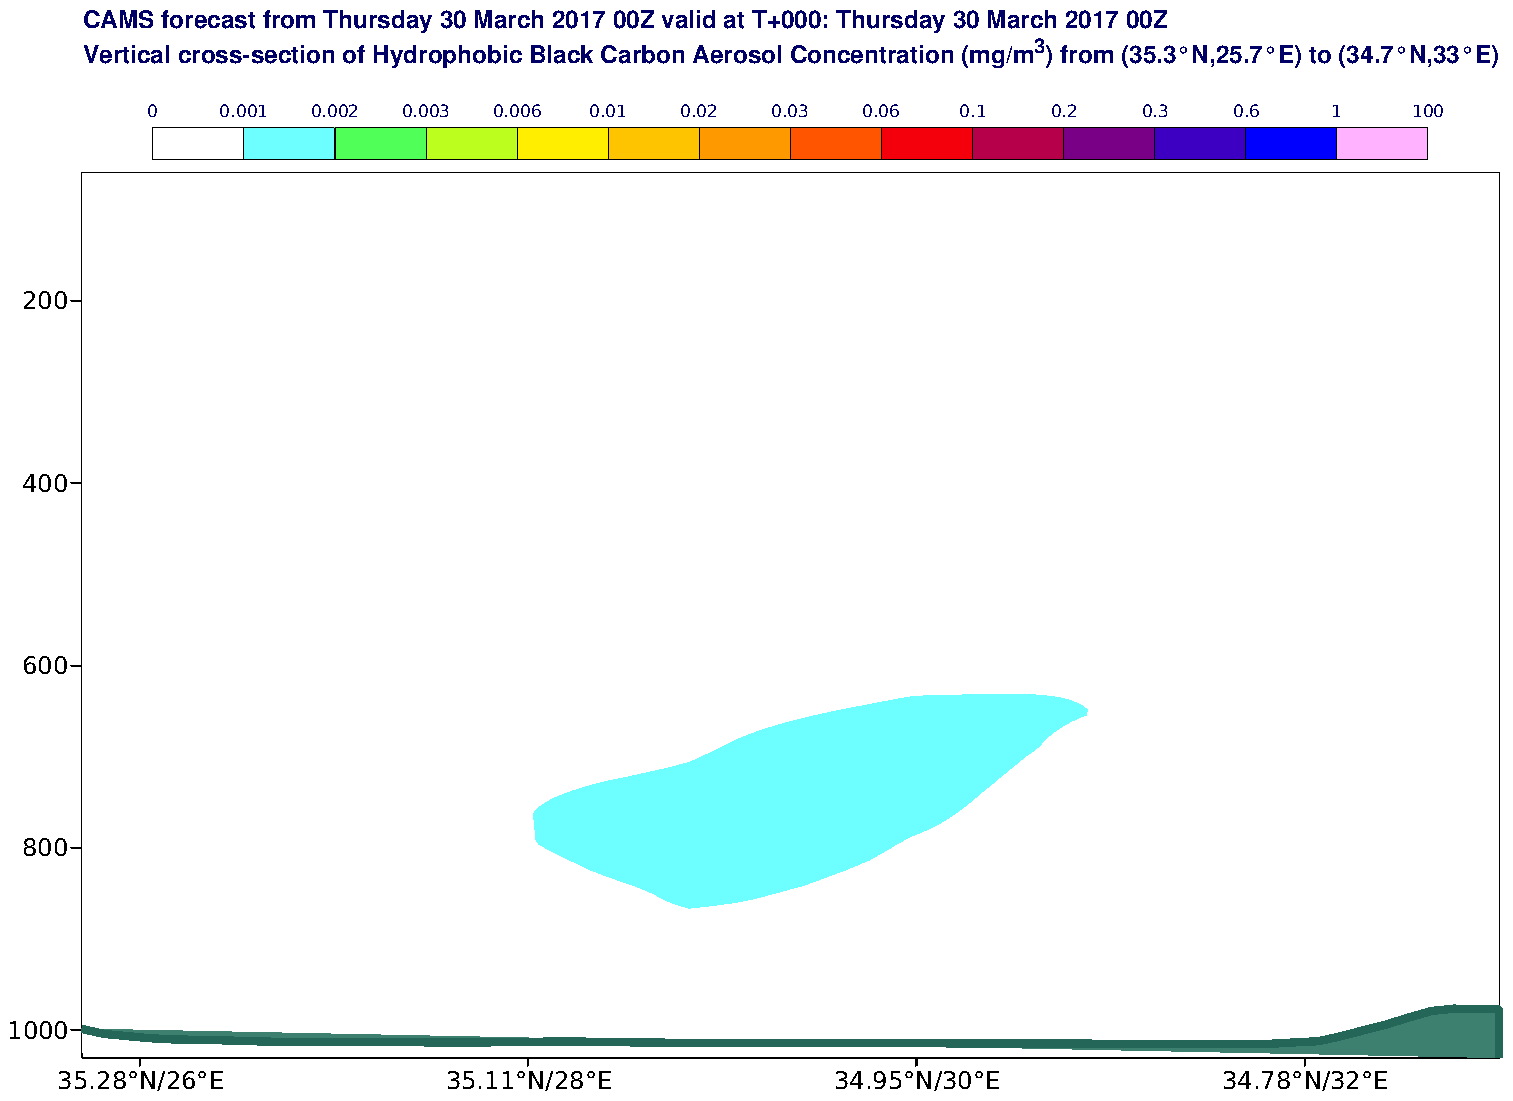 Vertical cross-section of Hydrophobic Black Carbon Aerosol Concentration (mg/m3) valid at T0 - 2017-03-30 00:00